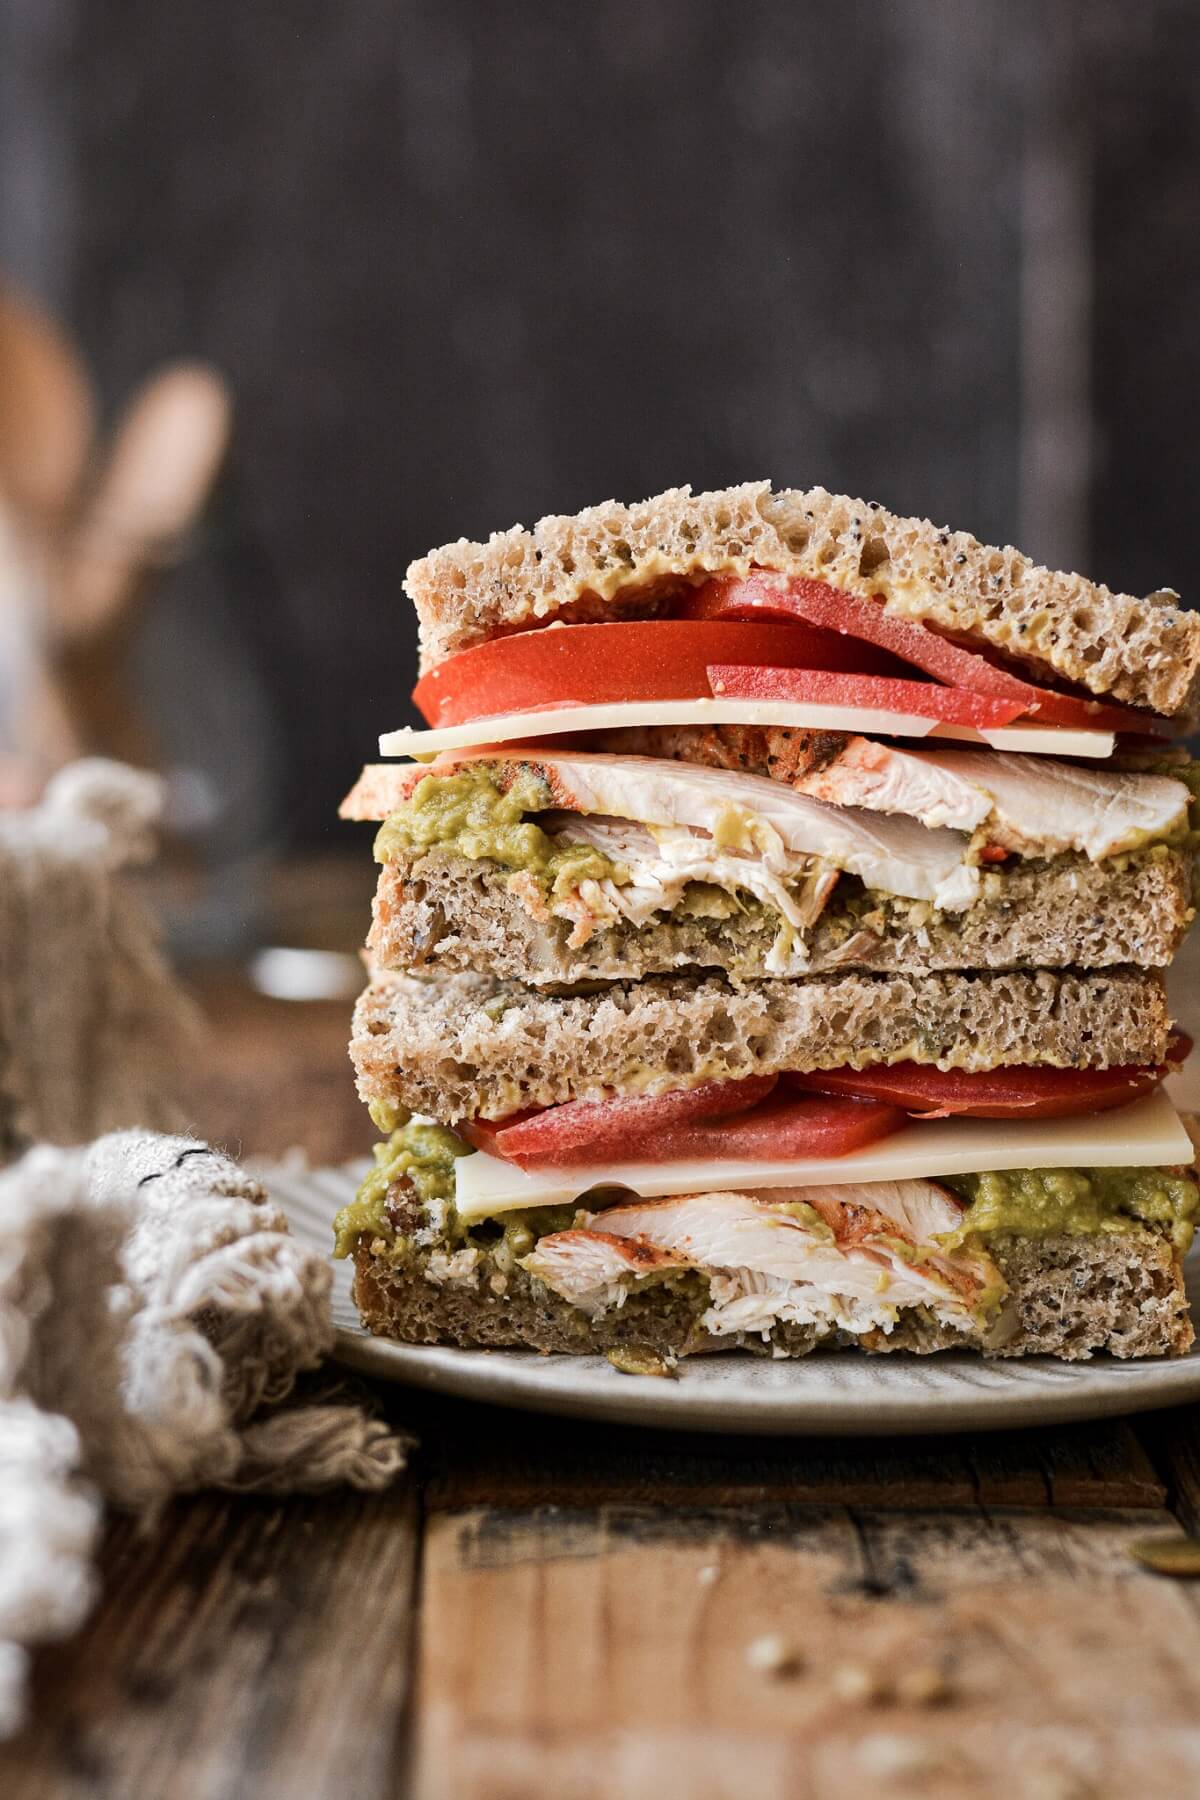 A sandwich made with homemade whole wheat bread.